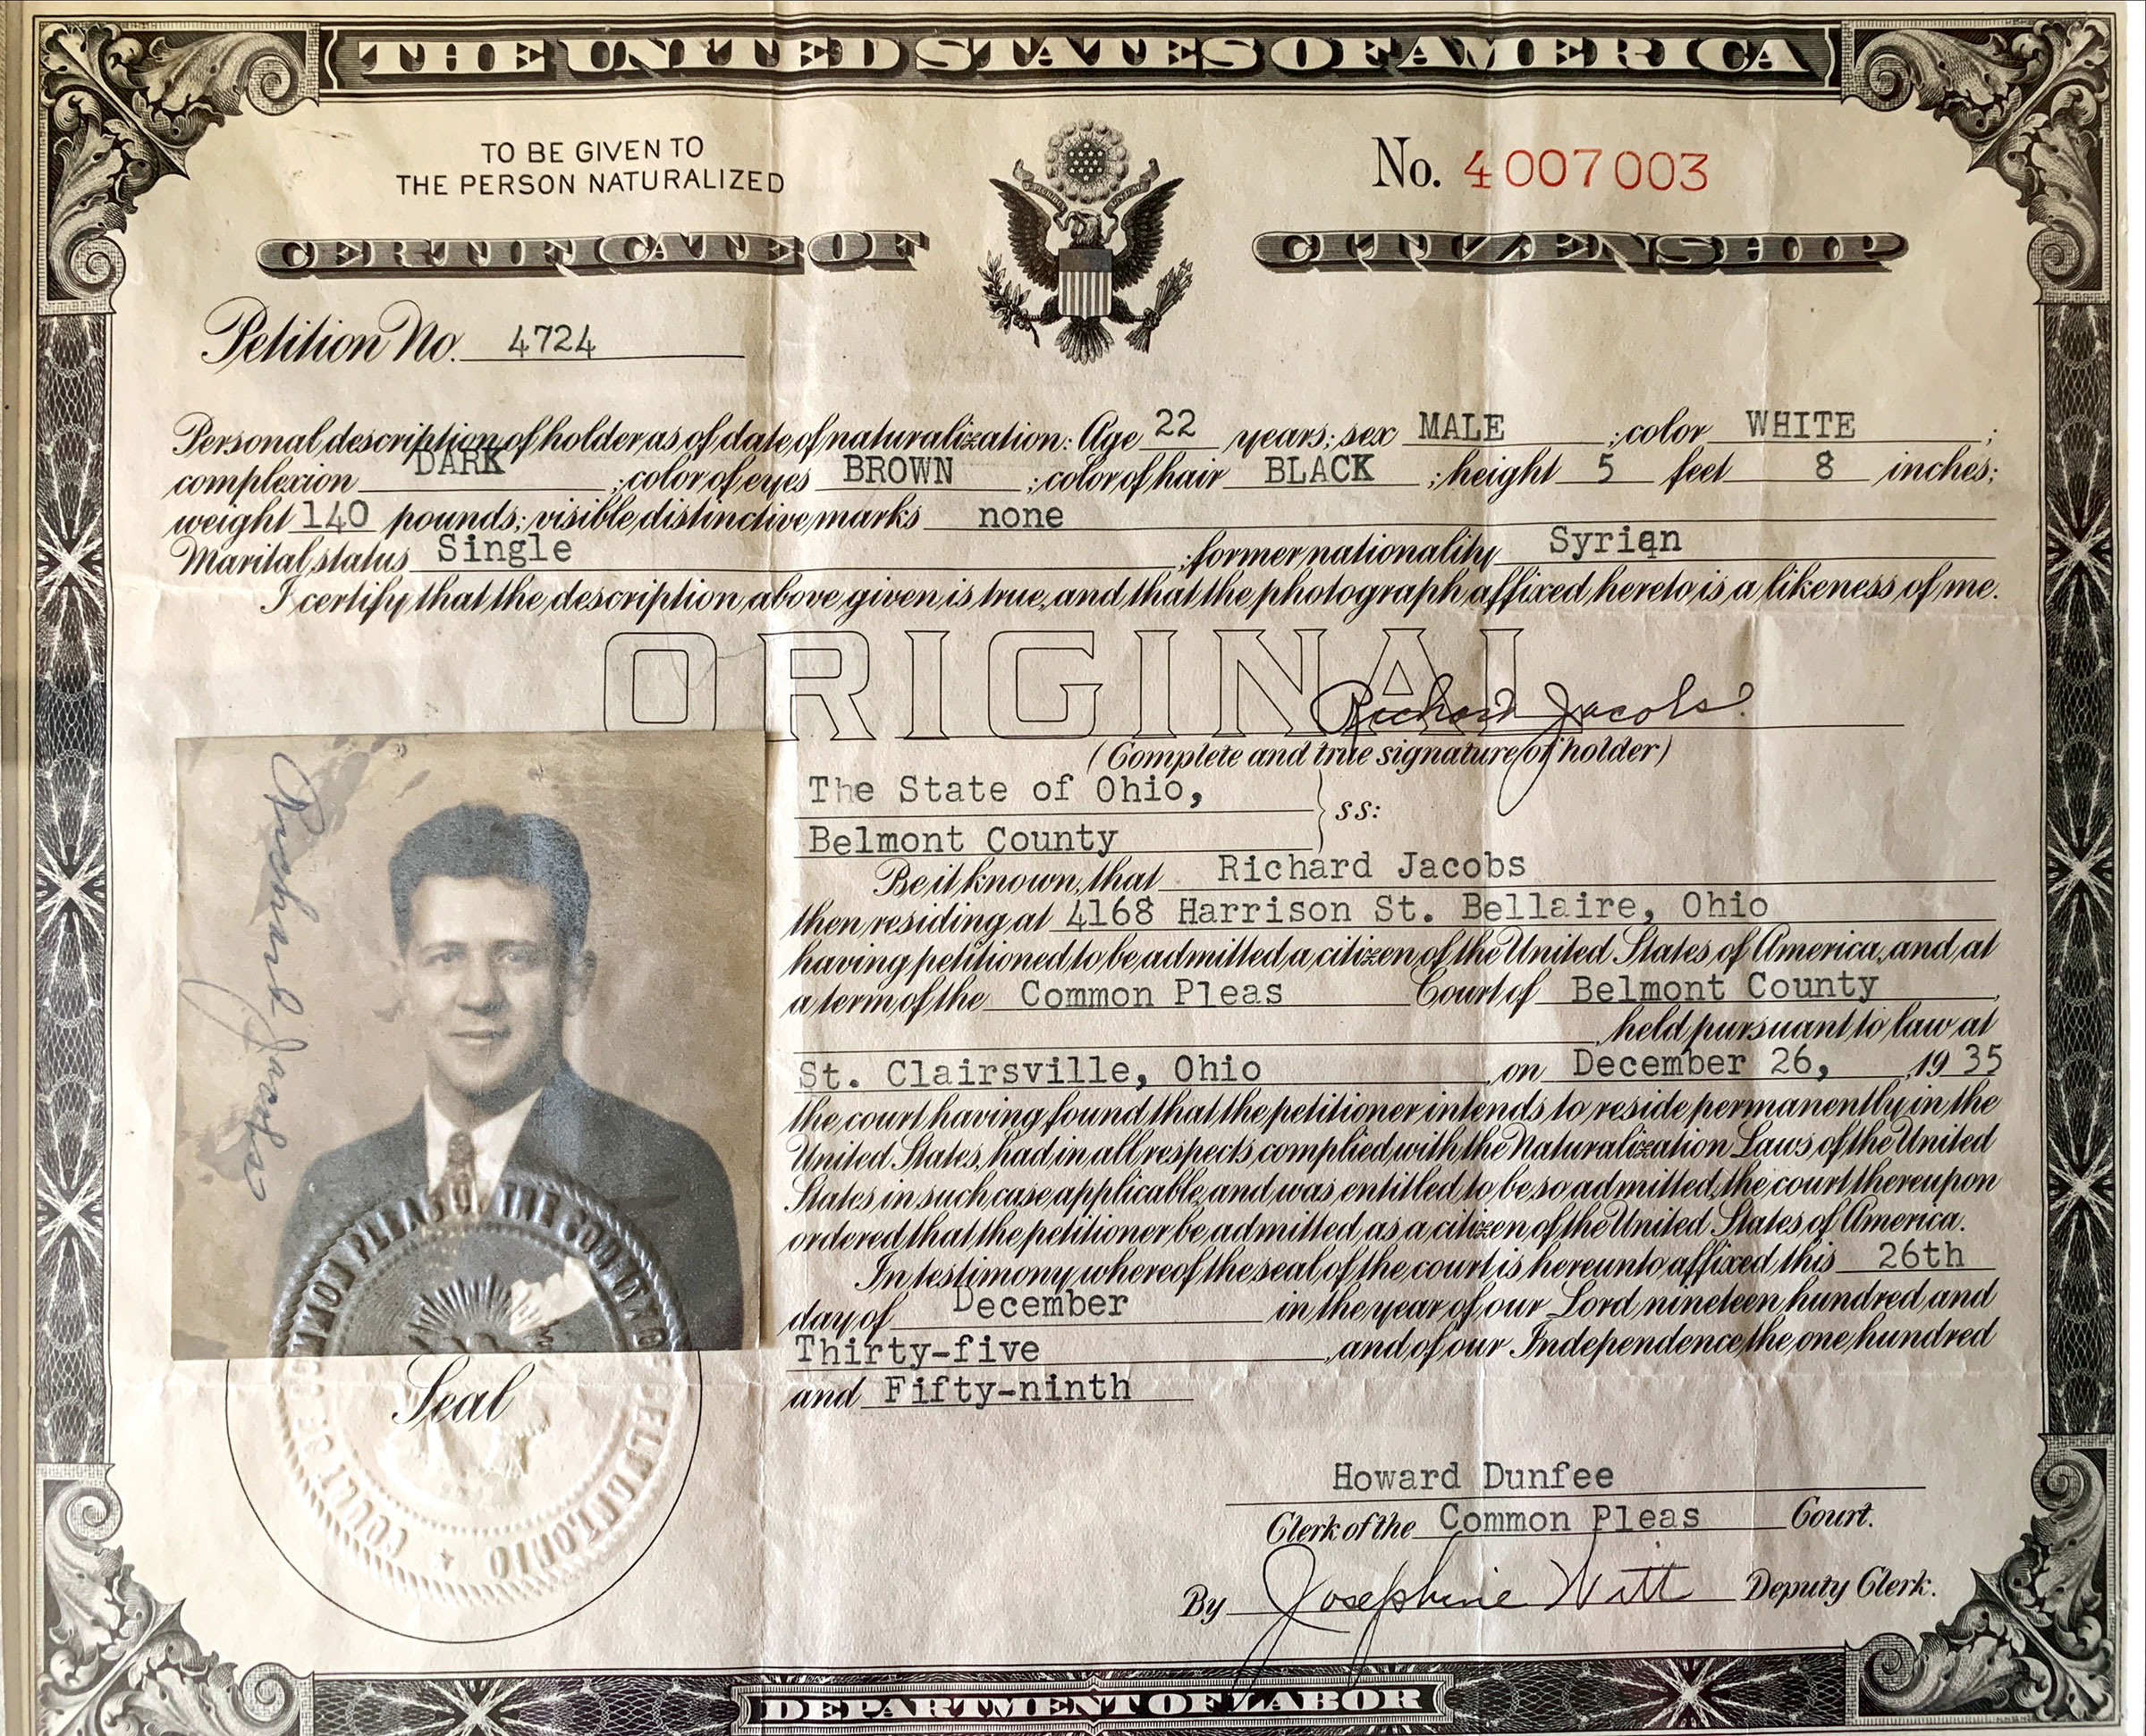 The citizenship papers of Henderson's grandfather. (Courtesy Todd Henderson)